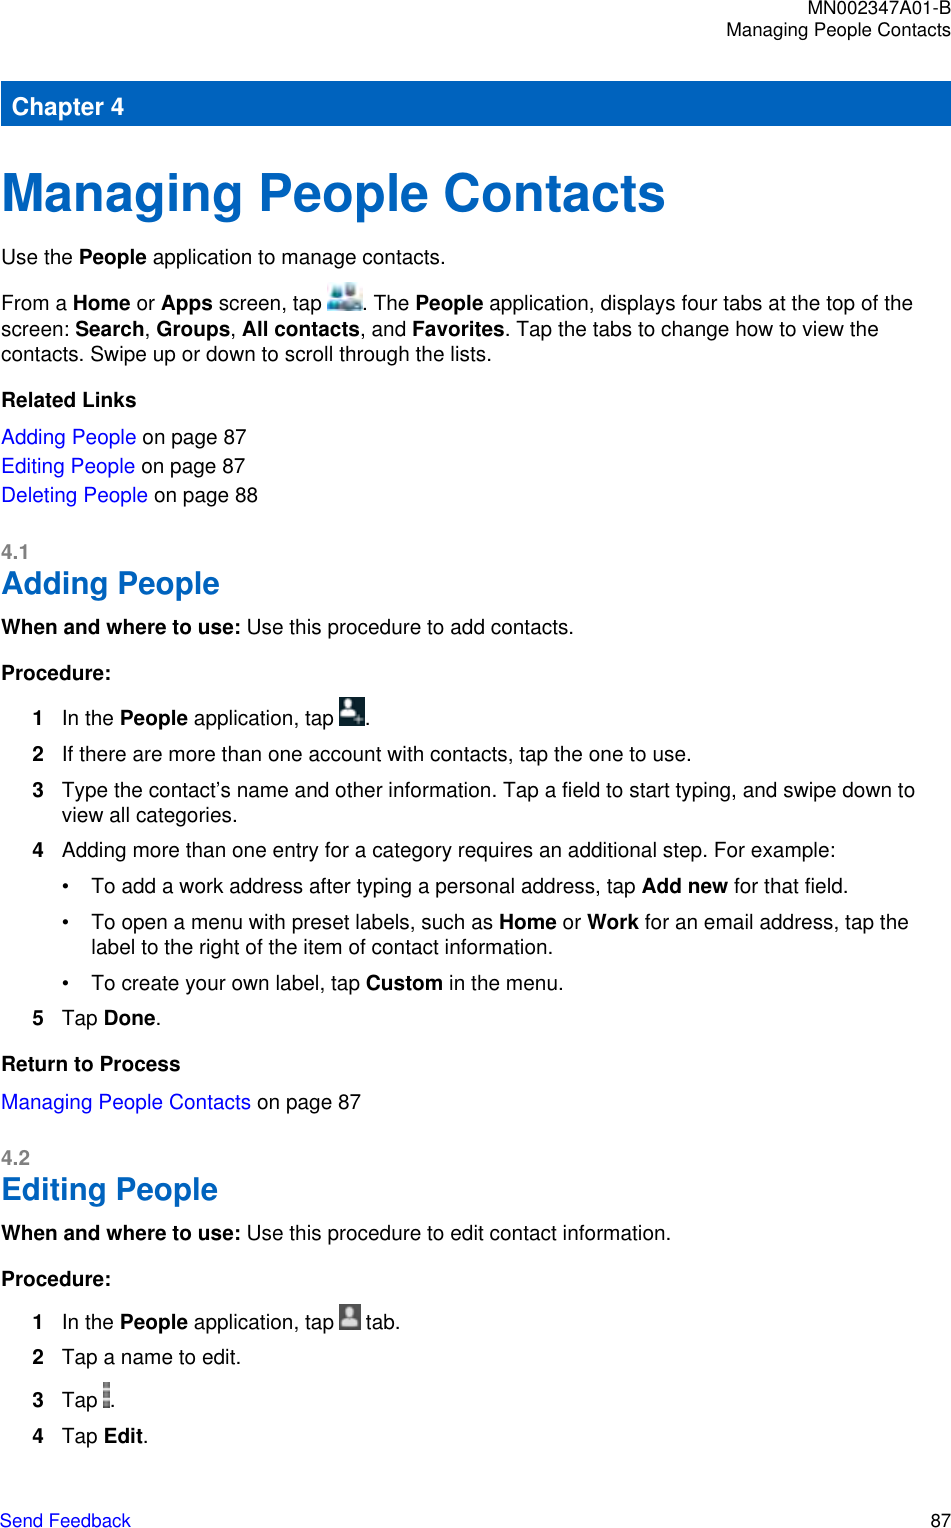 Chapter 4Managing People ContactsUse the People application to manage contacts.From a Home or Apps screen, tap  . The People application, displays four tabs at the top of thescreen: Search, Groups, All contacts, and Favorites. Tap the tabs to change how to view thecontacts. Swipe up or down to scroll through the lists.Related LinksAdding People on page 87Editing People on page 87Deleting People on page 884.1Adding PeopleWhen and where to use: Use this procedure to add contacts.Procedure:1In the People application, tap  .2If there are more than one account with contacts, tap the one to use.3Type the contact’s name and other information. Tap a field to start typing, and swipe down toview all categories.4Adding more than one entry for a category requires an additional step. For example:• To add a work address after typing a personal address, tap Add new for that field.• To open a menu with preset labels, such as Home or Work for an email address, tap thelabel to the right of the item of contact information.• To create your own label, tap Custom in the menu.5Tap Done.Return to ProcessManaging People Contacts on page 874.2Editing PeopleWhen and where to use: Use this procedure to edit contact information.Procedure:1In the People application, tap   tab.2Tap a name to edit.3Tap  .4Tap Edit.MN002347A01-BManaging People ContactsSend Feedback   87